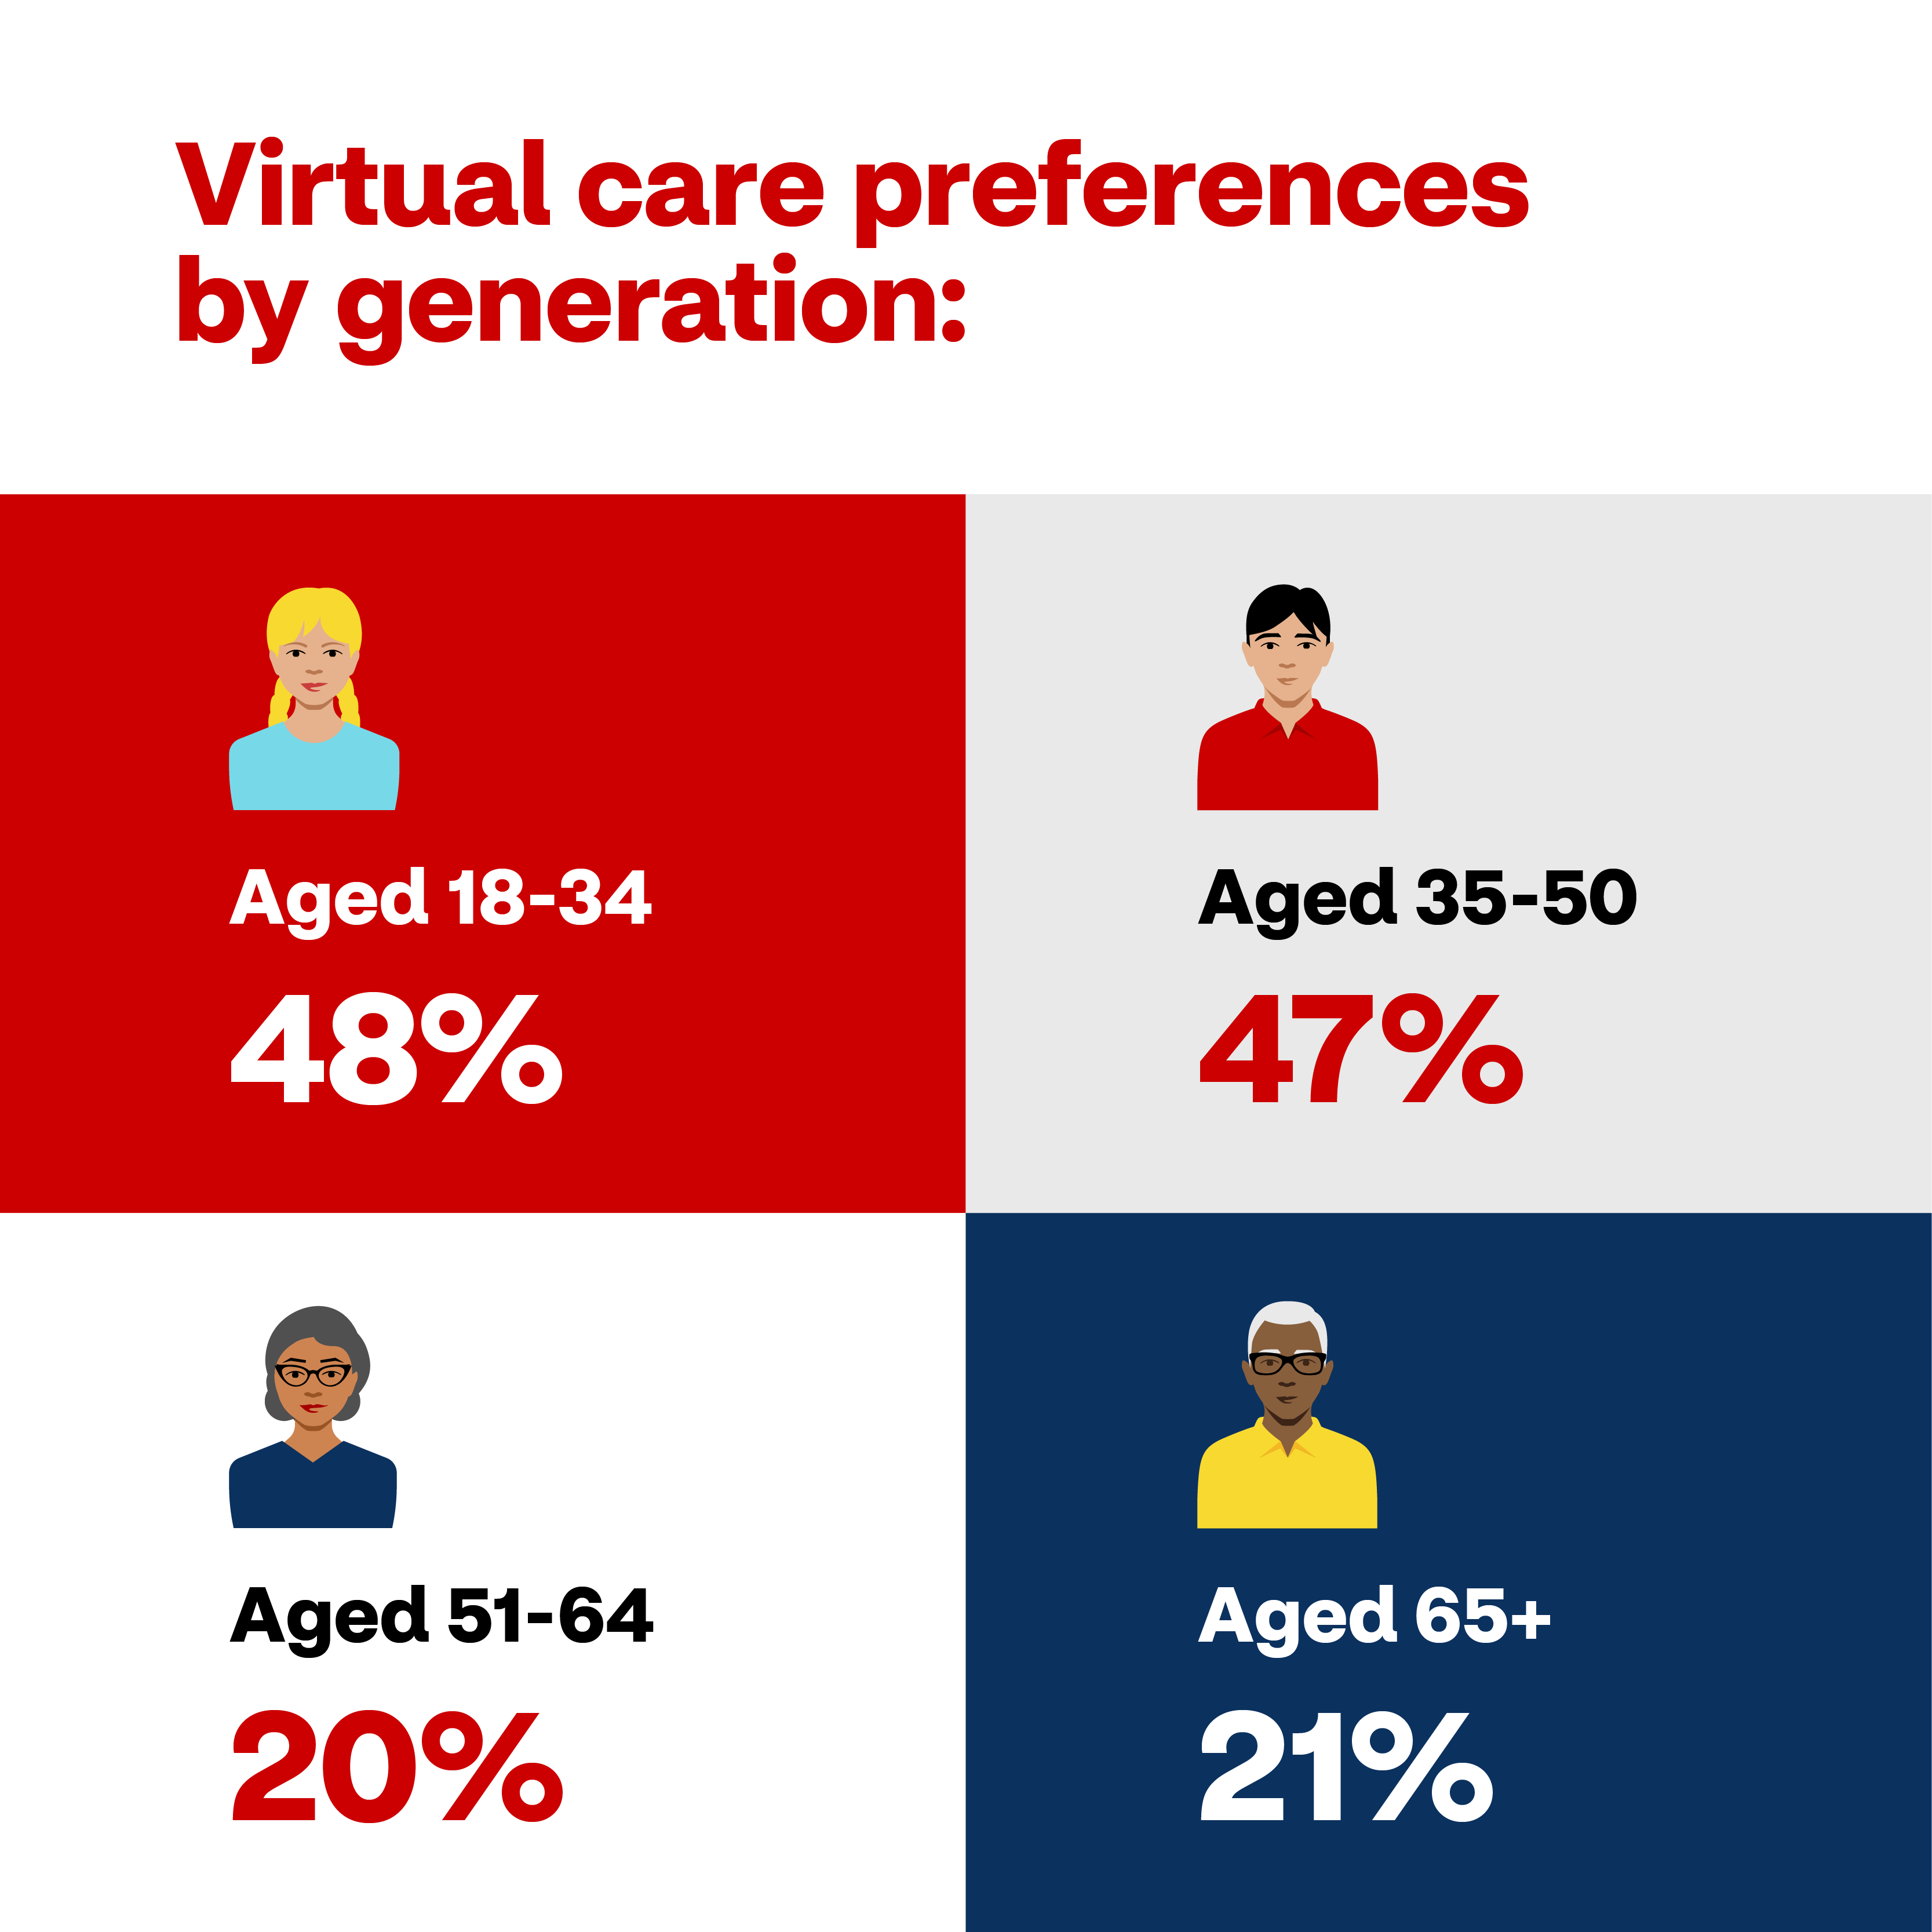 Virtual care preferences by generation: 48% of individual aged 18 to 34 prefer virtual care, 47% of people aged 35 to 50 prefer virtual care, 20% of people aged 51 to 64 prefer virtual care, and 21% of people 65 and over prefer virtual care.